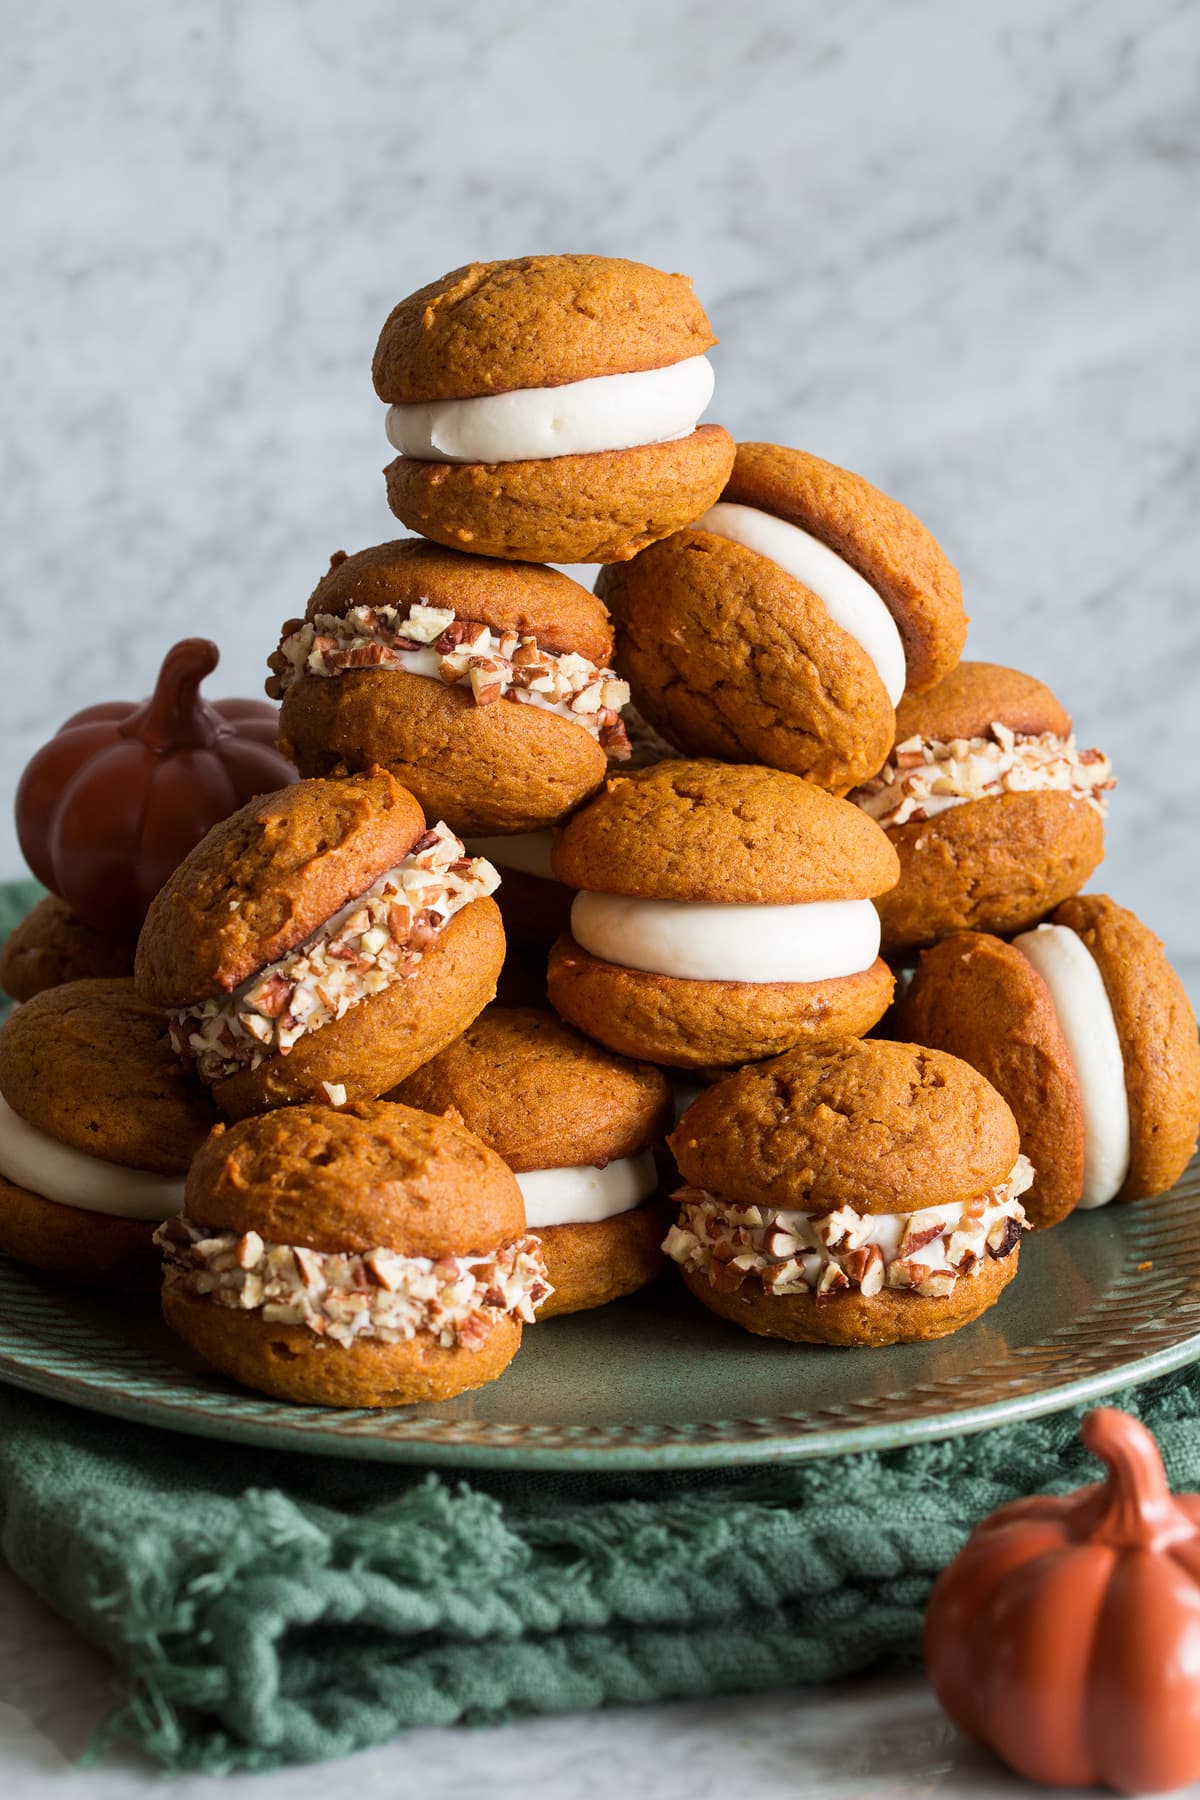 Pumpkin Whoopie Pies stacked on a large plate. They are filled with cream cheese frosting and some are covered with chopped pecans.